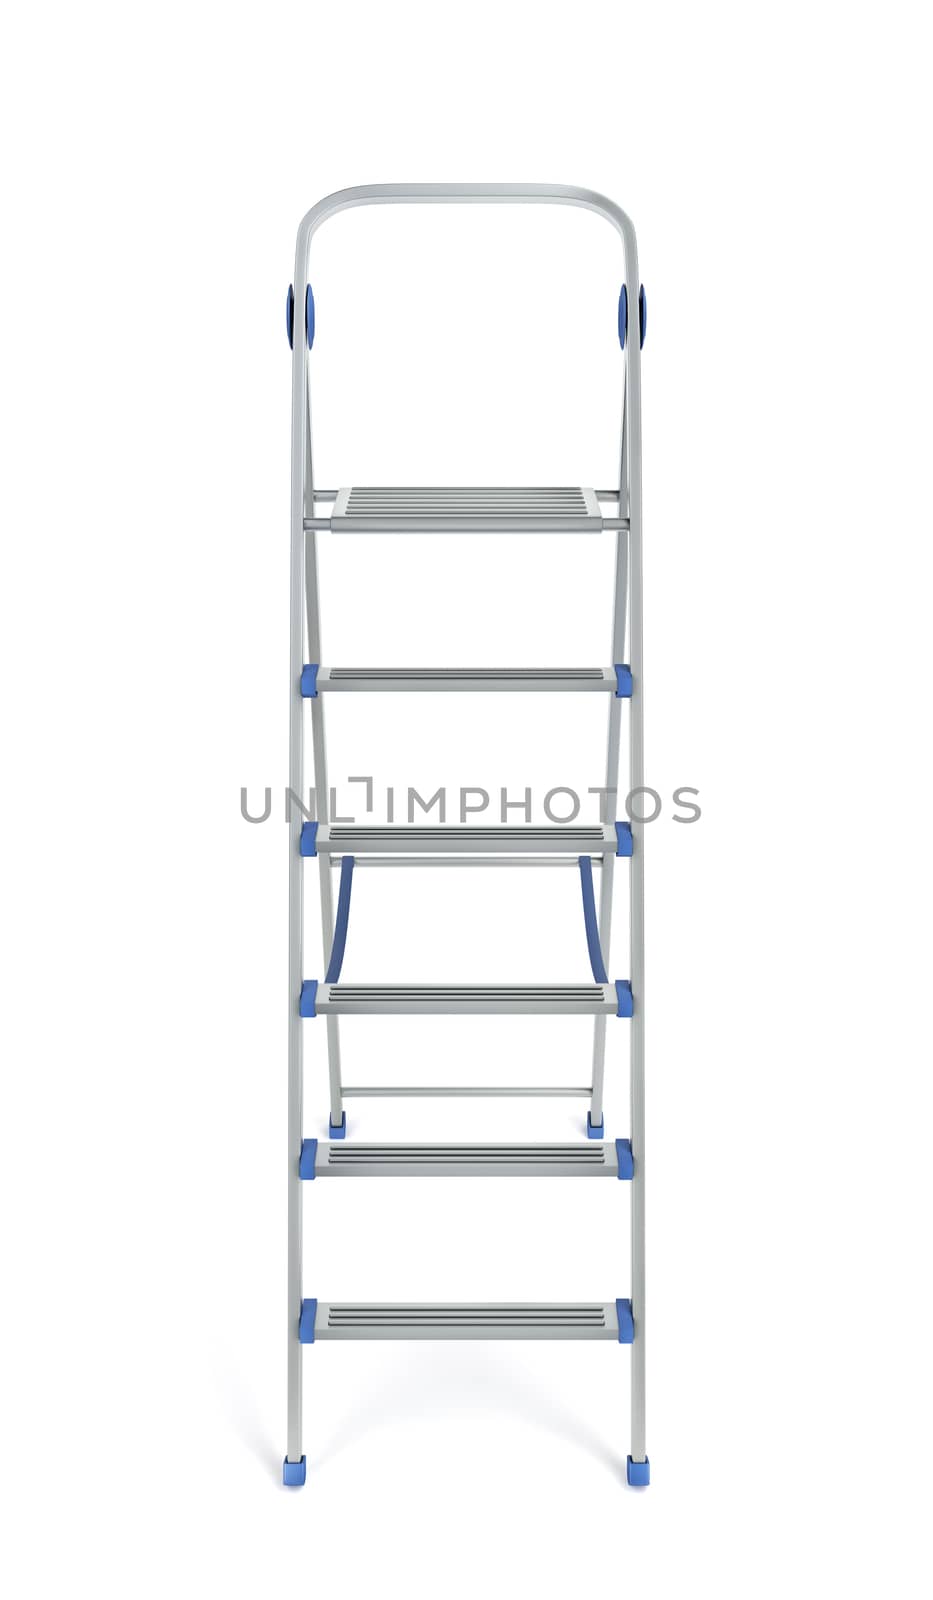 Aluminum step ladder by magraphics